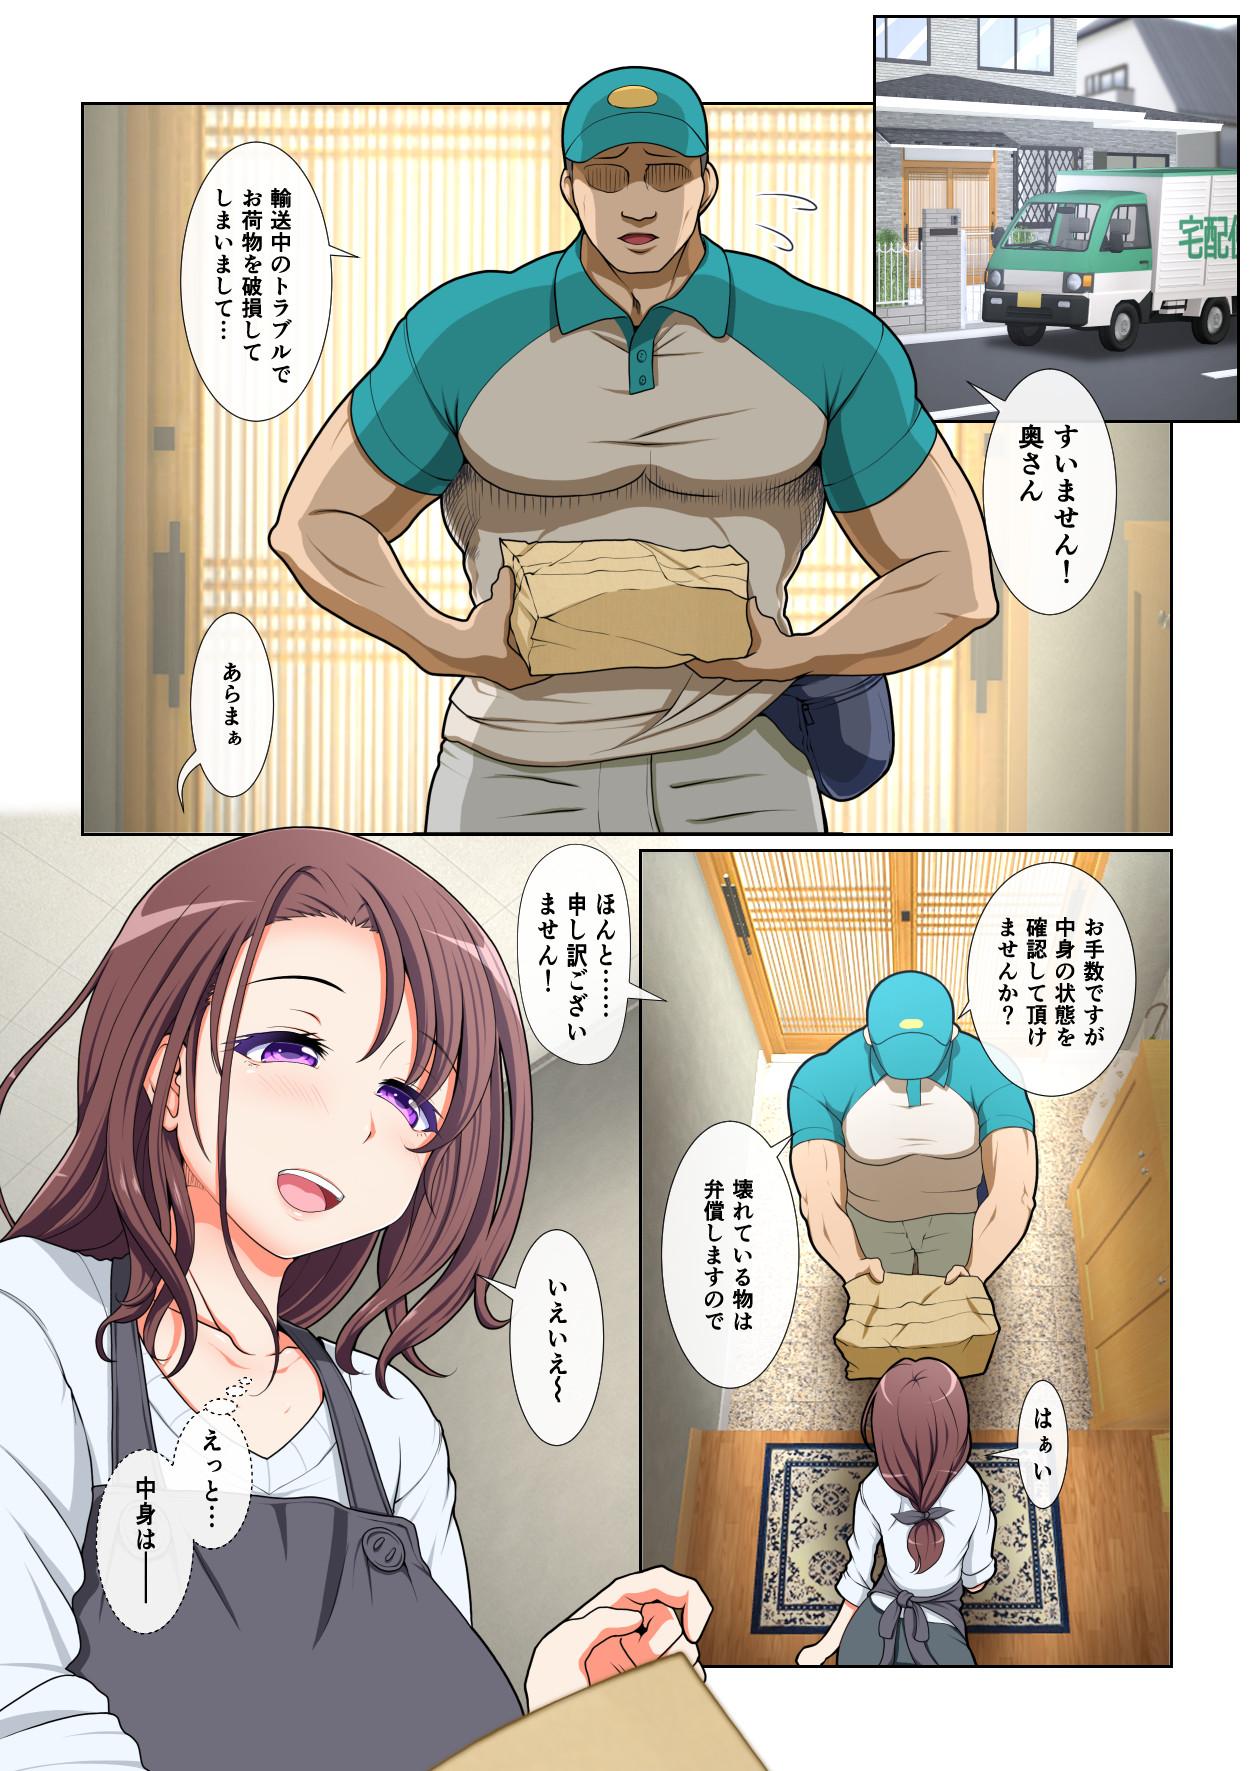 Blowing ドスケベな人妻 - Original Girl On Girl - Page 6